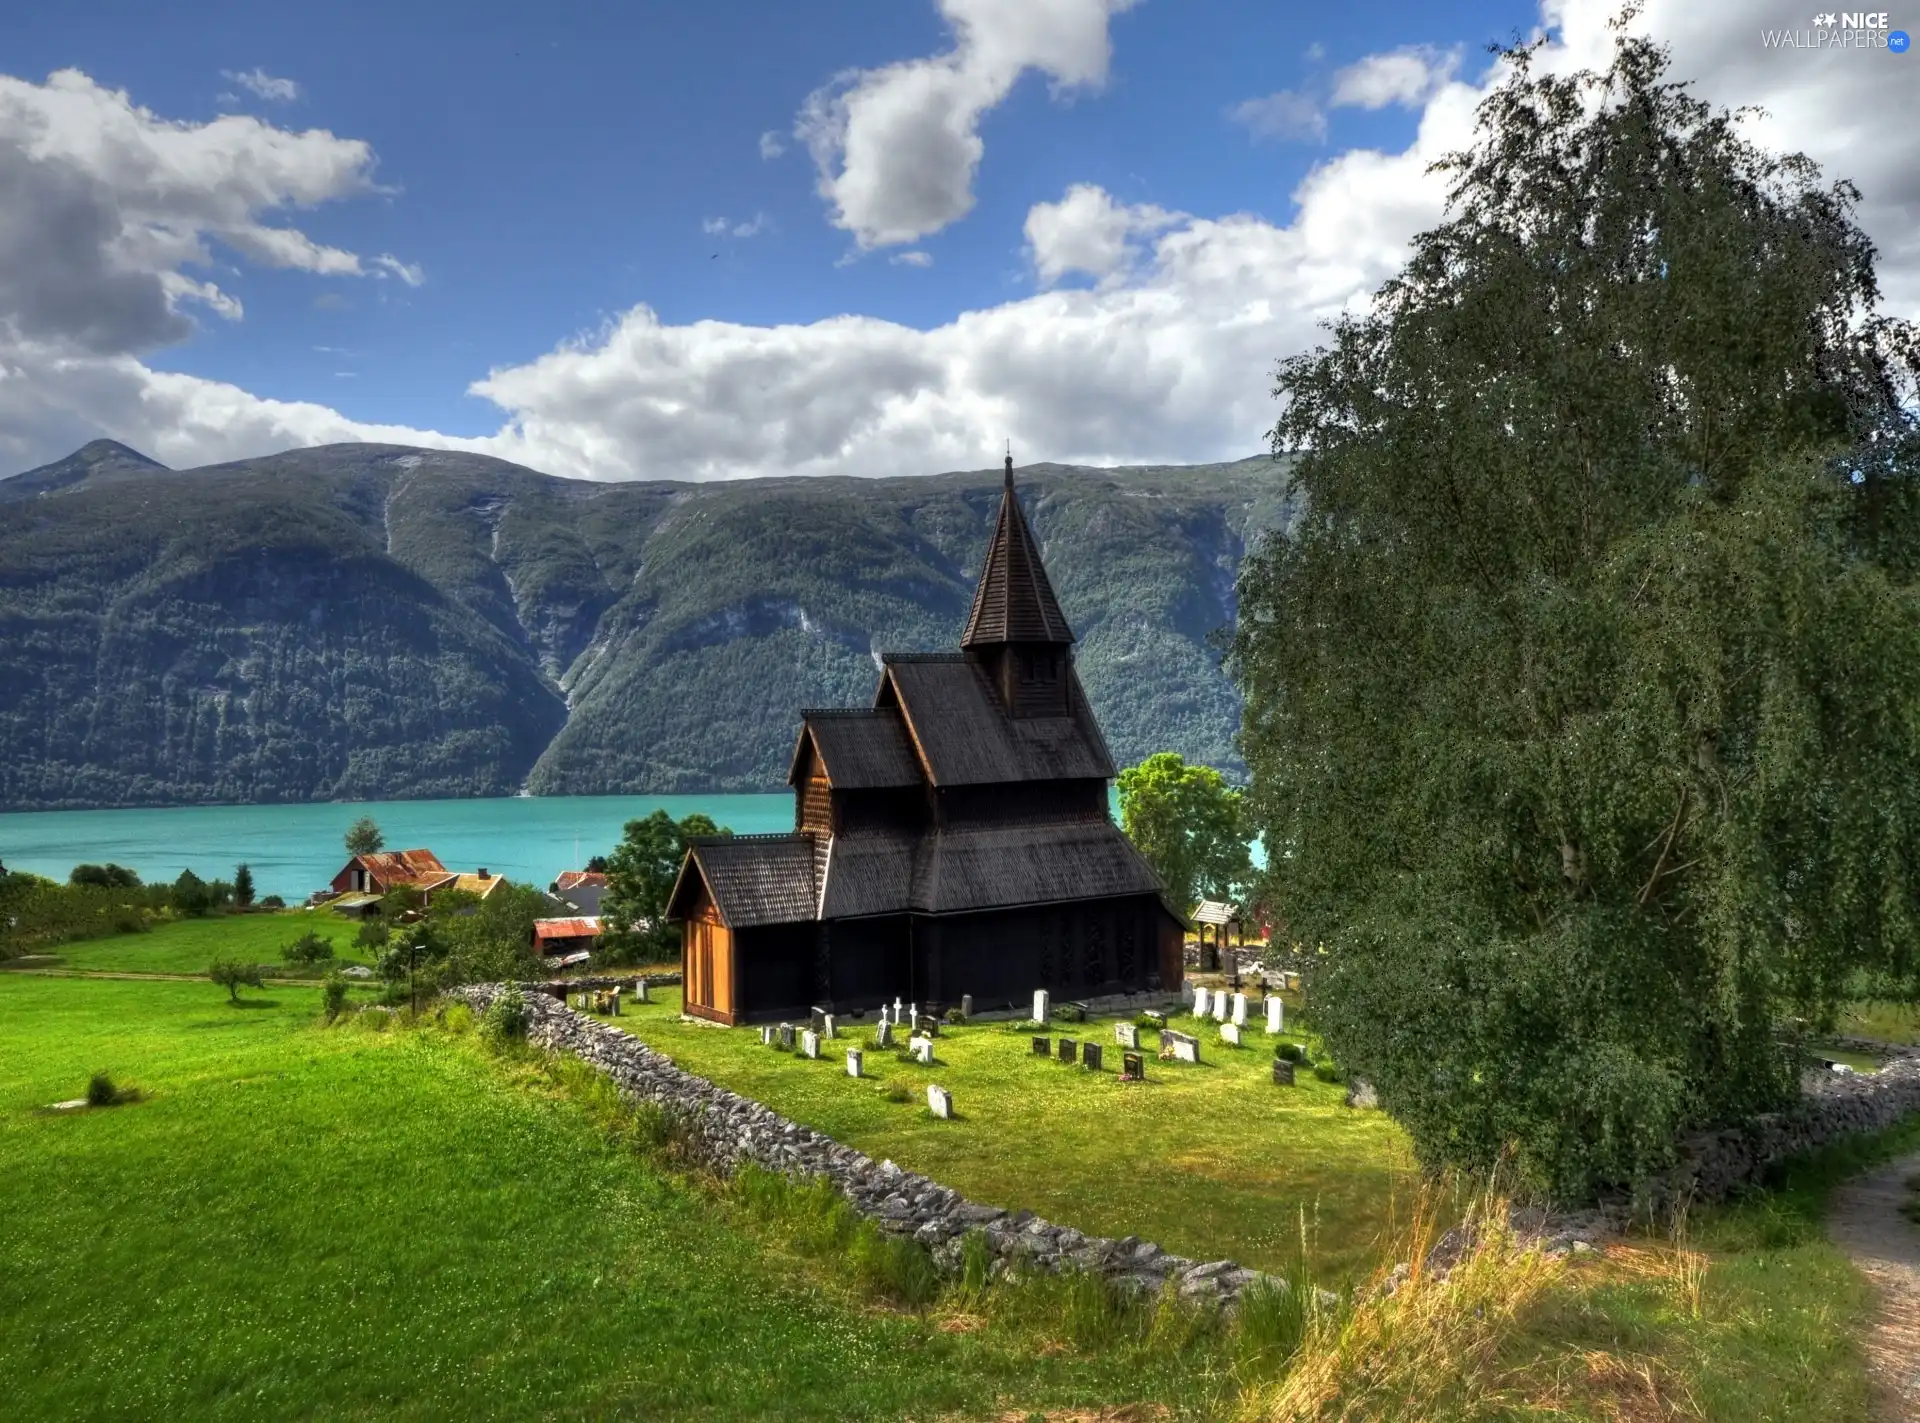 Church, trees, clouds, wooden, Mountains